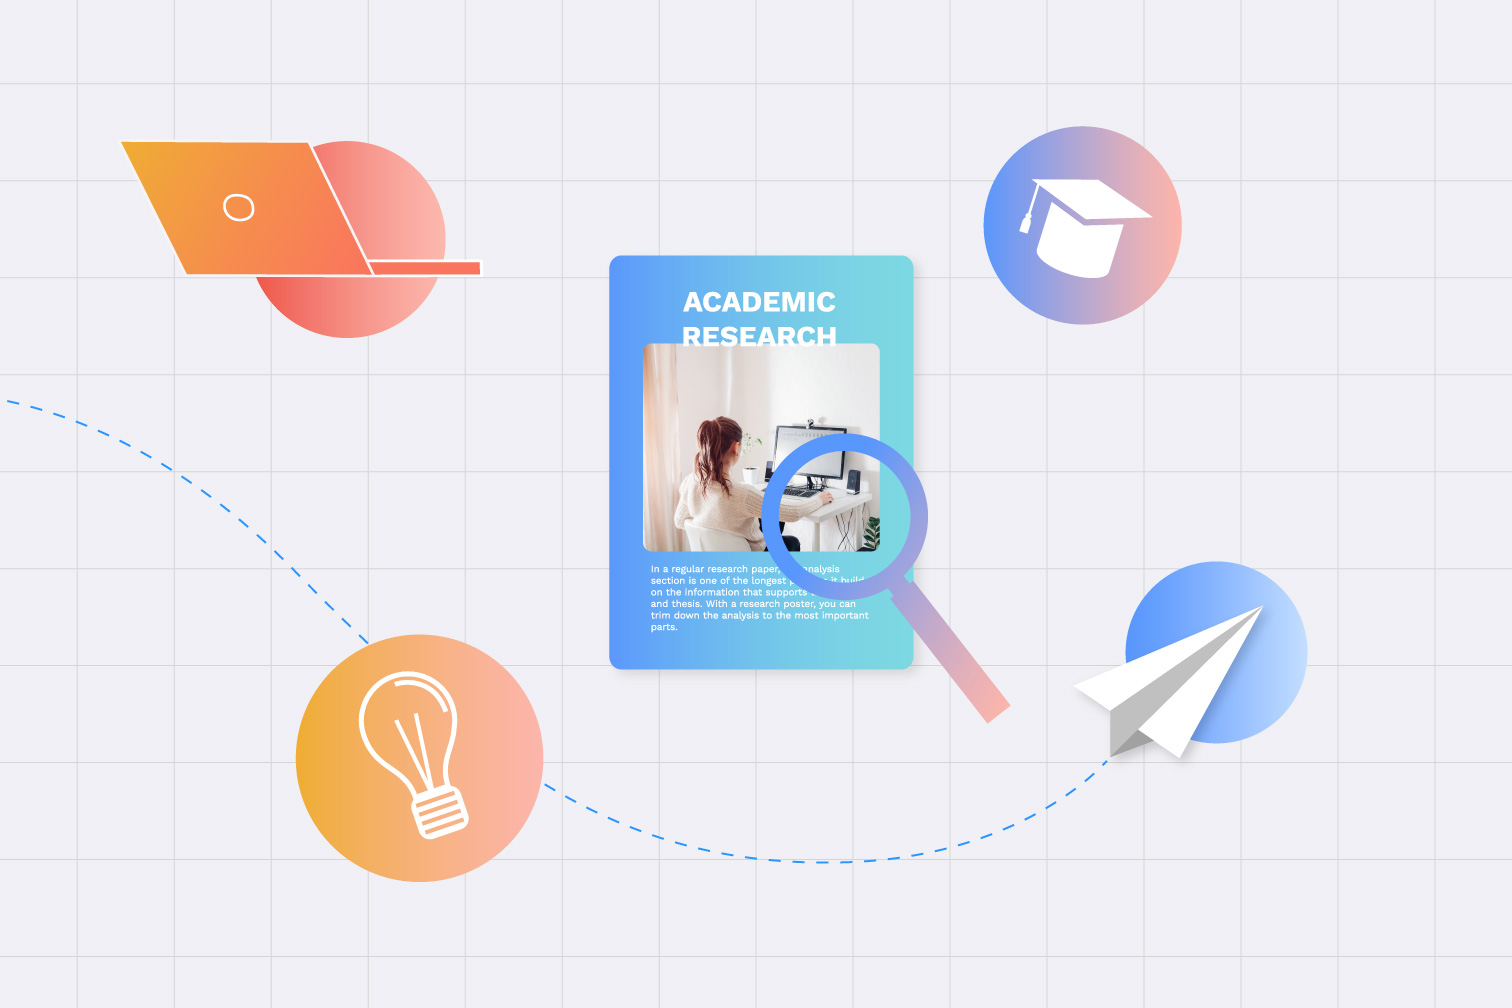 How will research enhance you as a student